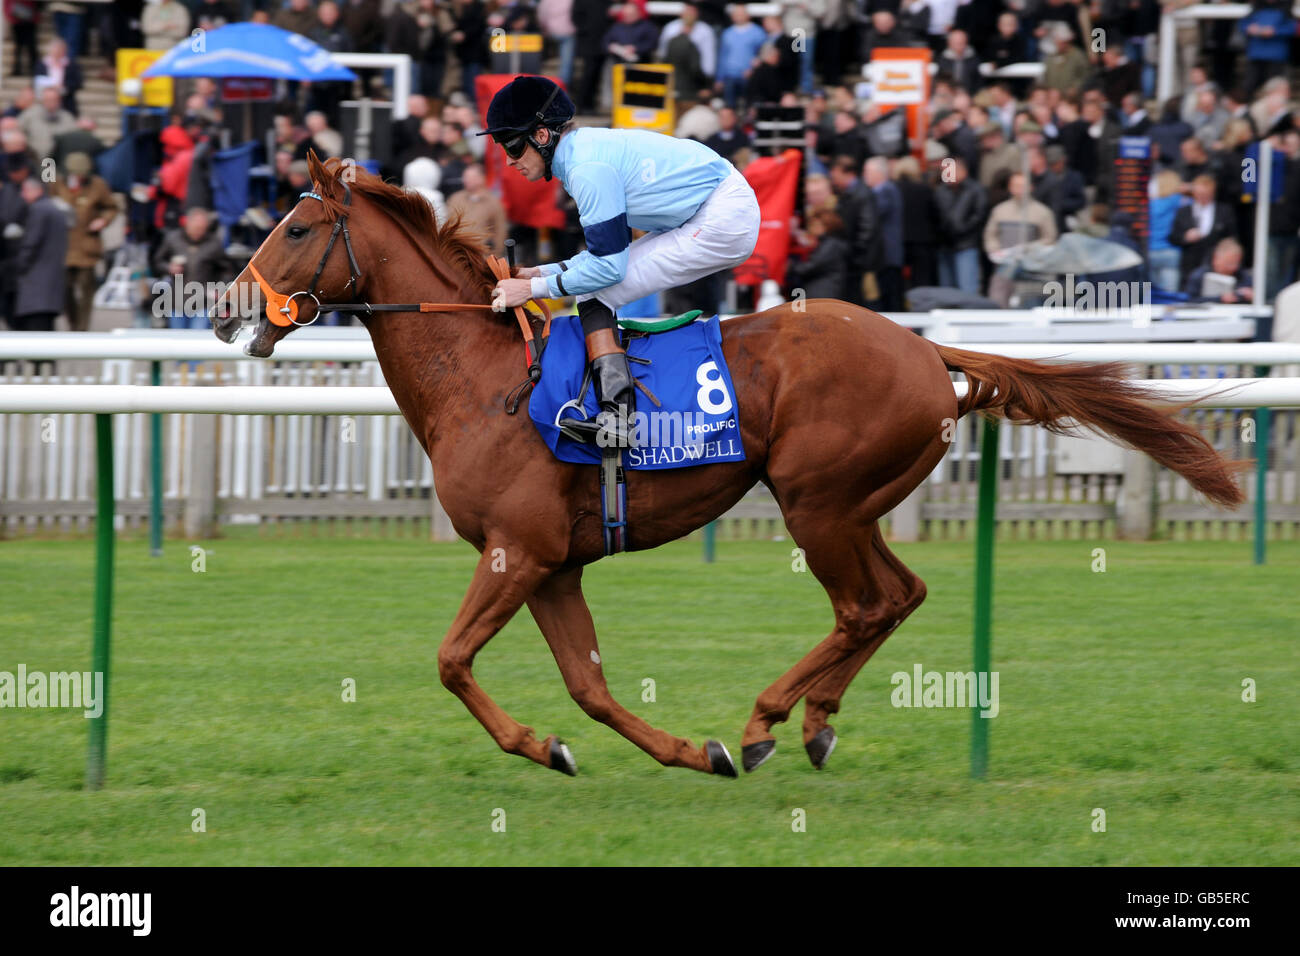 Horse Racing - Cambridgeshire Meeting - Newmarket. Prolific ridden by Richard Hughes going to post for the Shadwell Middle Park Stakes at Newmarket Stock Photo